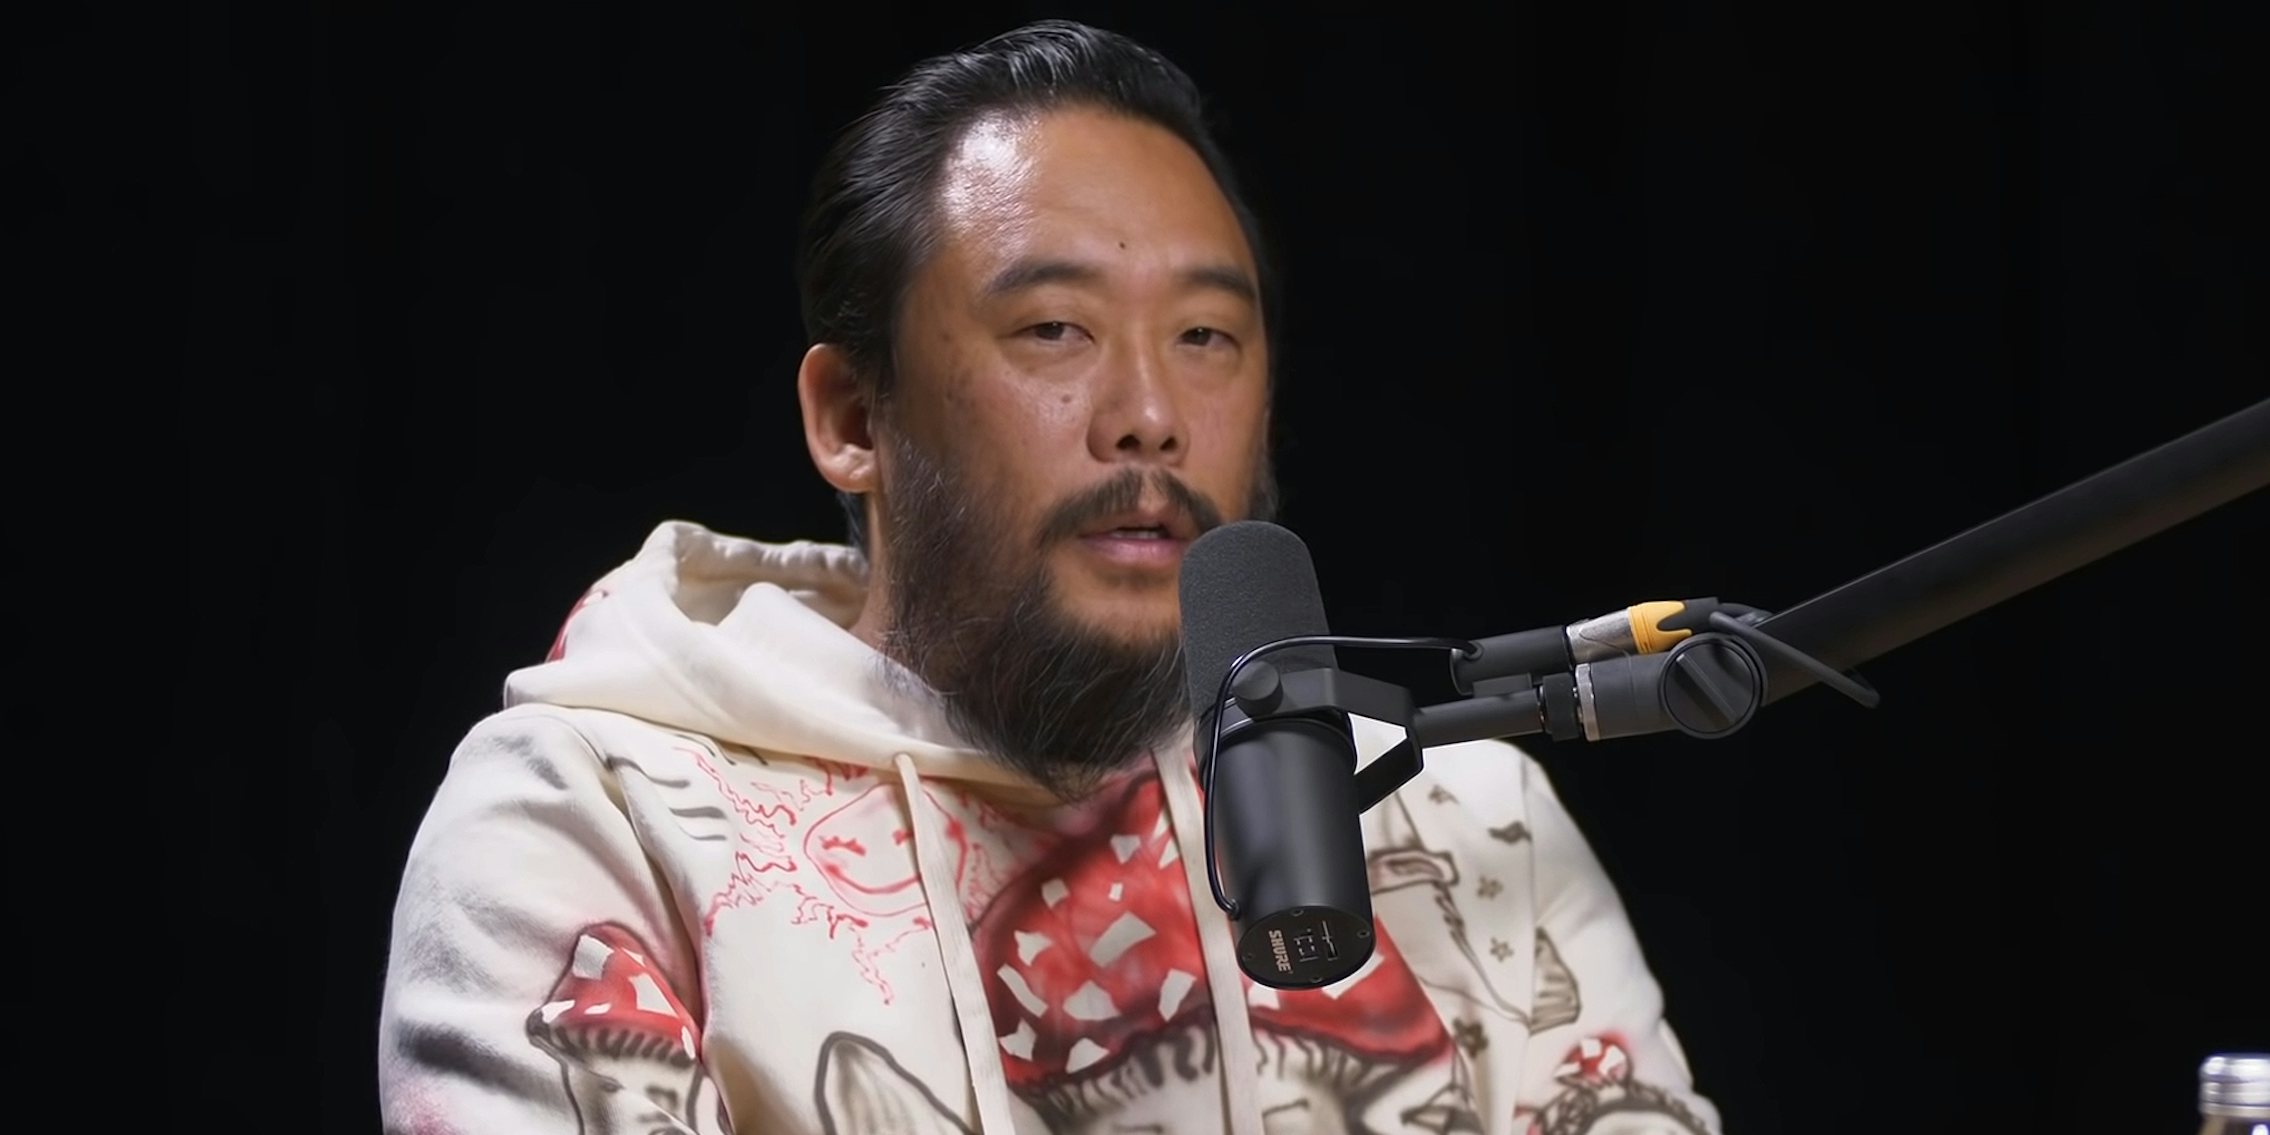 David Choe speaking into microphone in front of black background